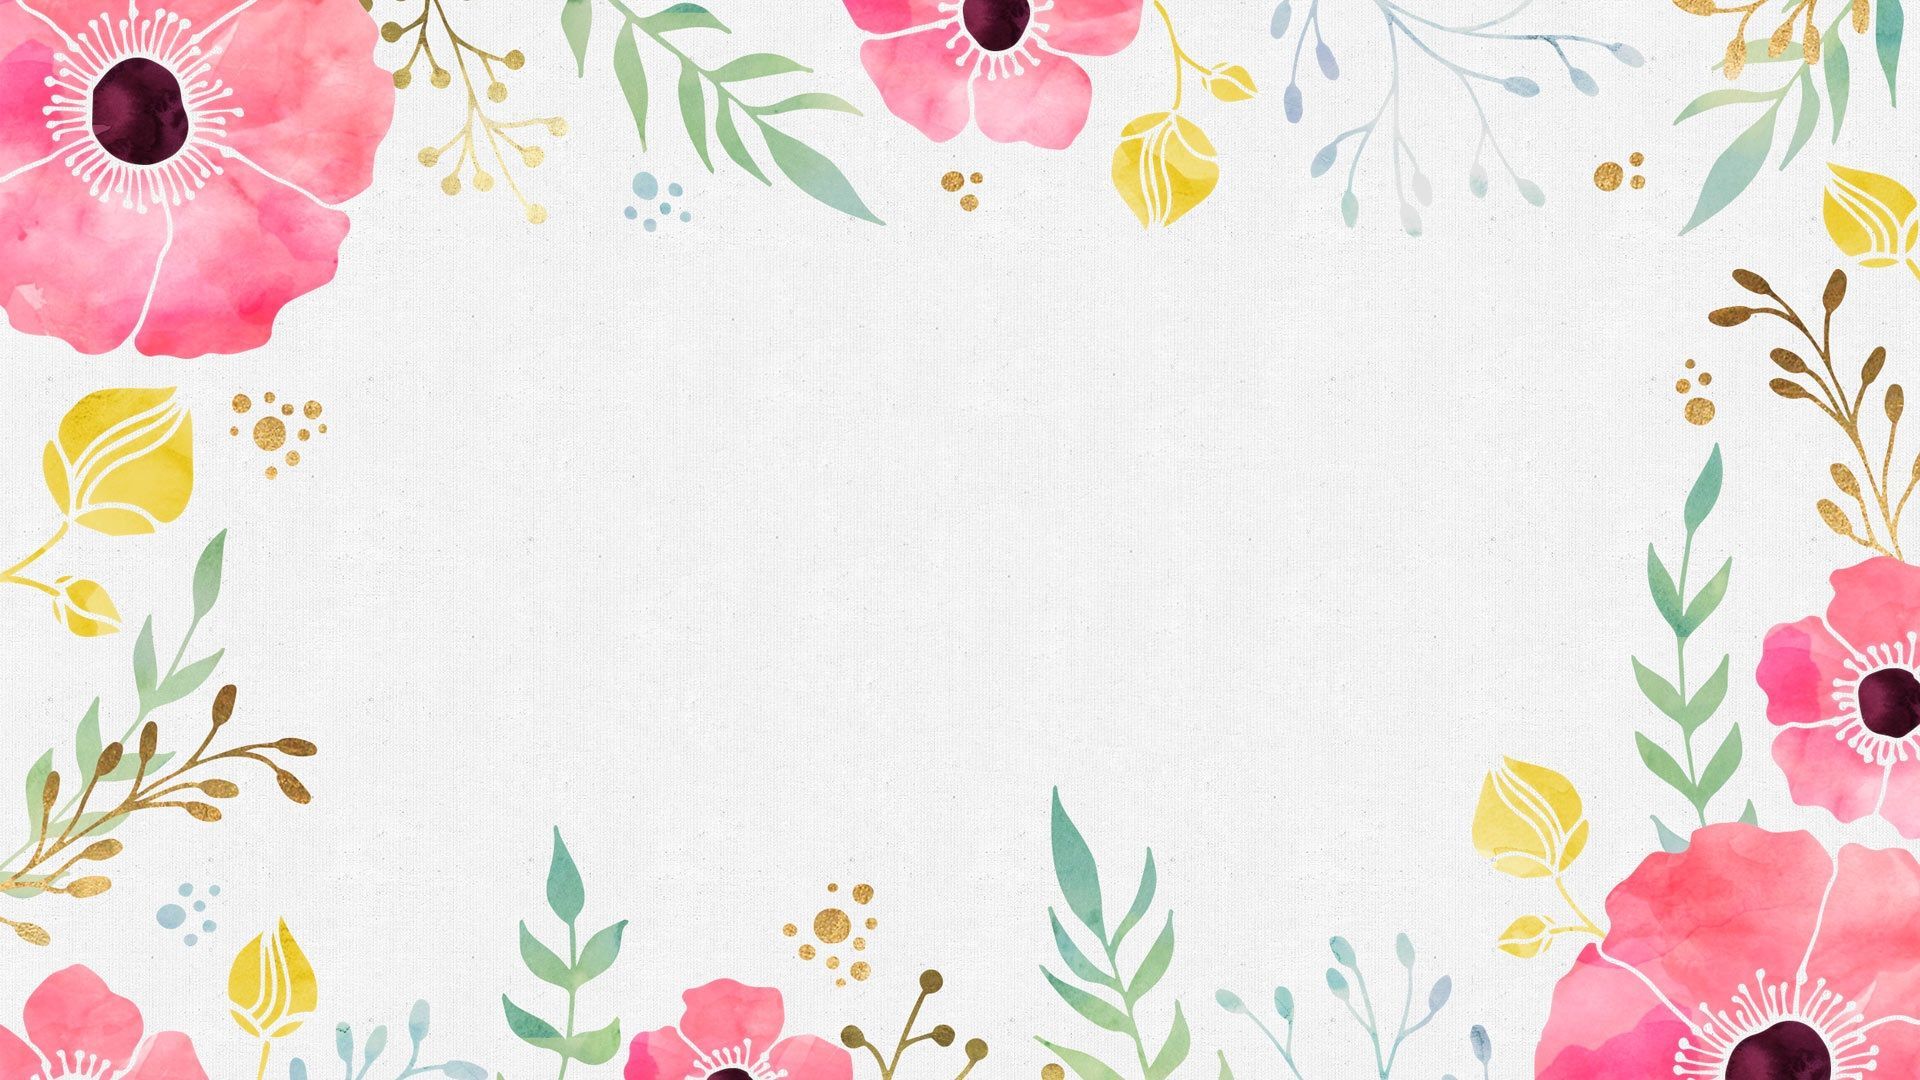 Flower Watercolor Wallpaper & Background Beautiful Best Available For Download Flower Watercolor Photo Free On Zicxa.com Image